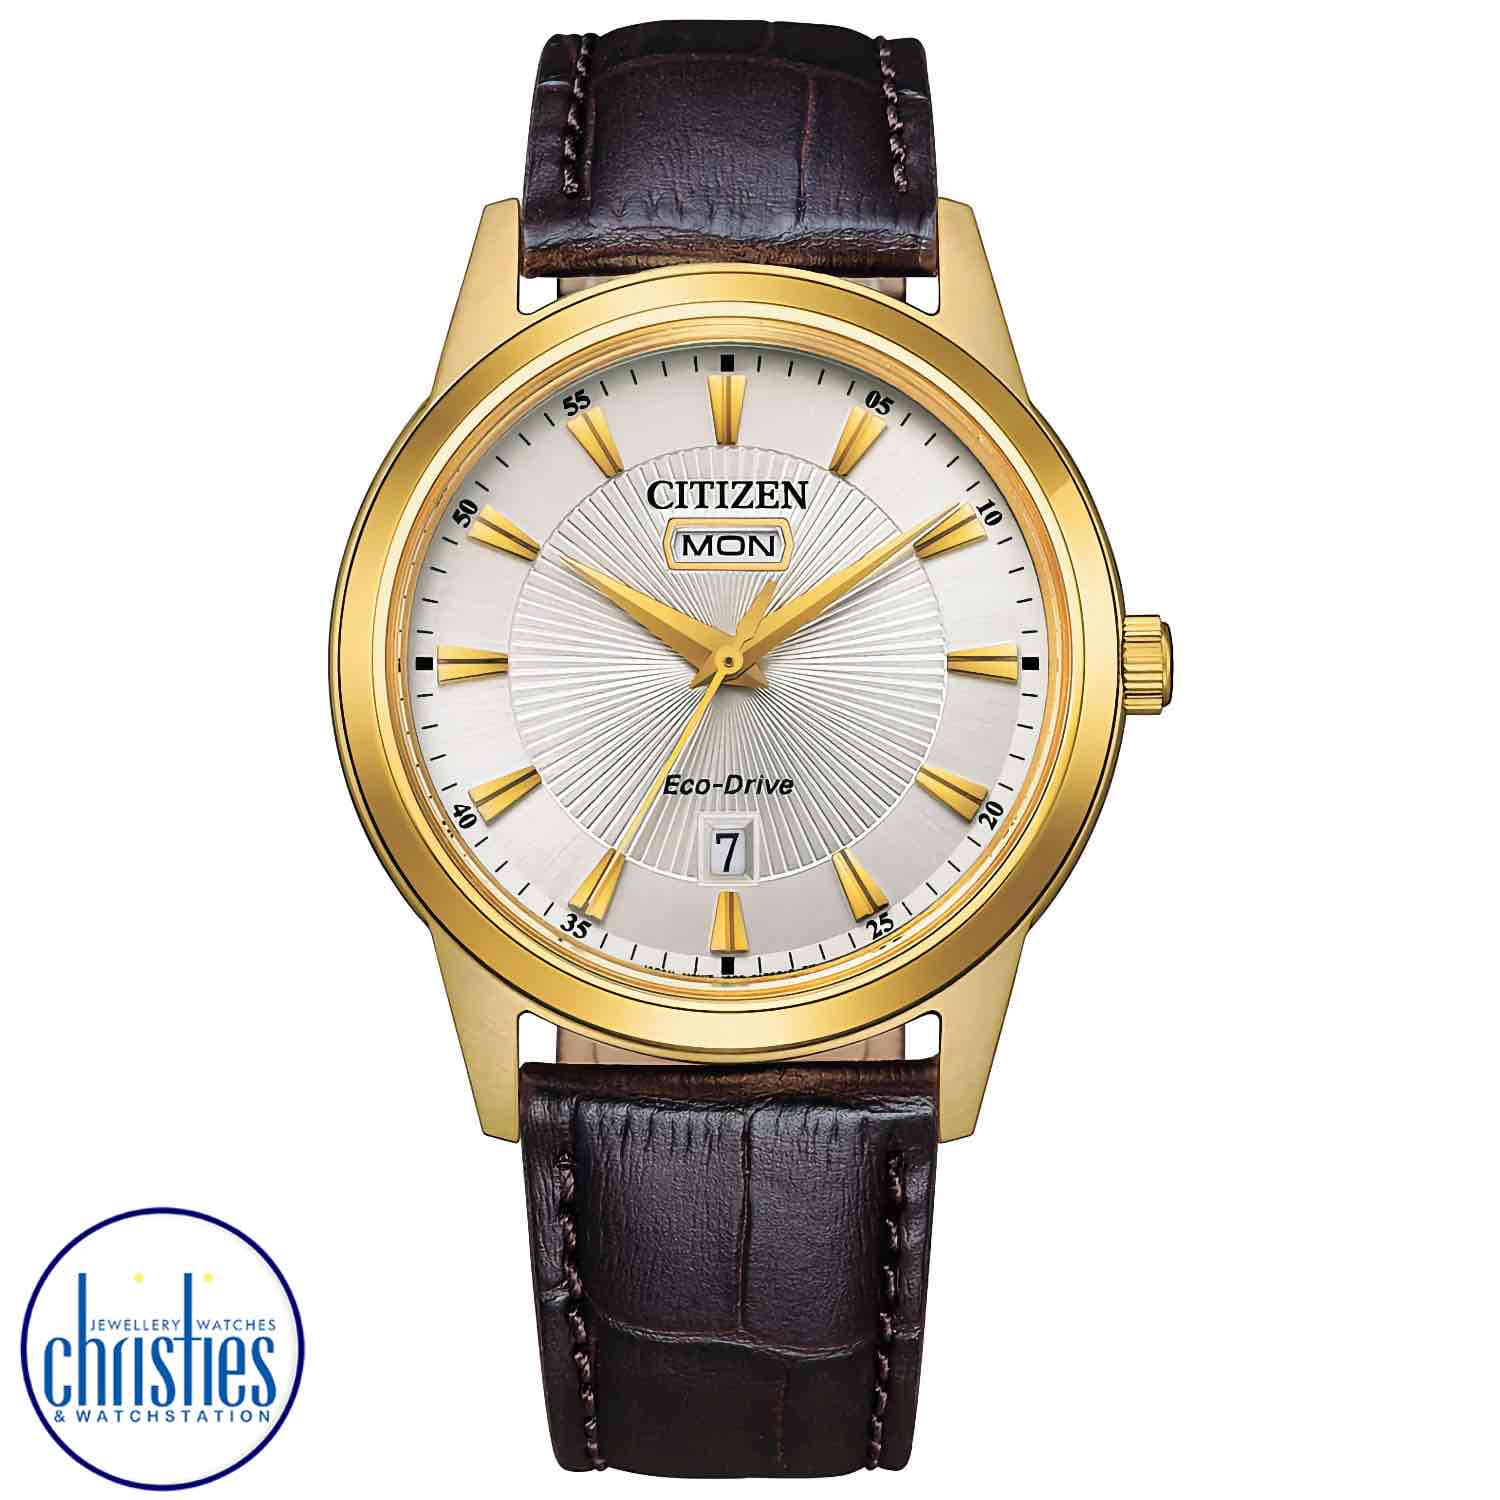 AW0102-13A CITIZEN Eco-Drive Watch. A modern timepiece that displays classic aesthetic appeal.